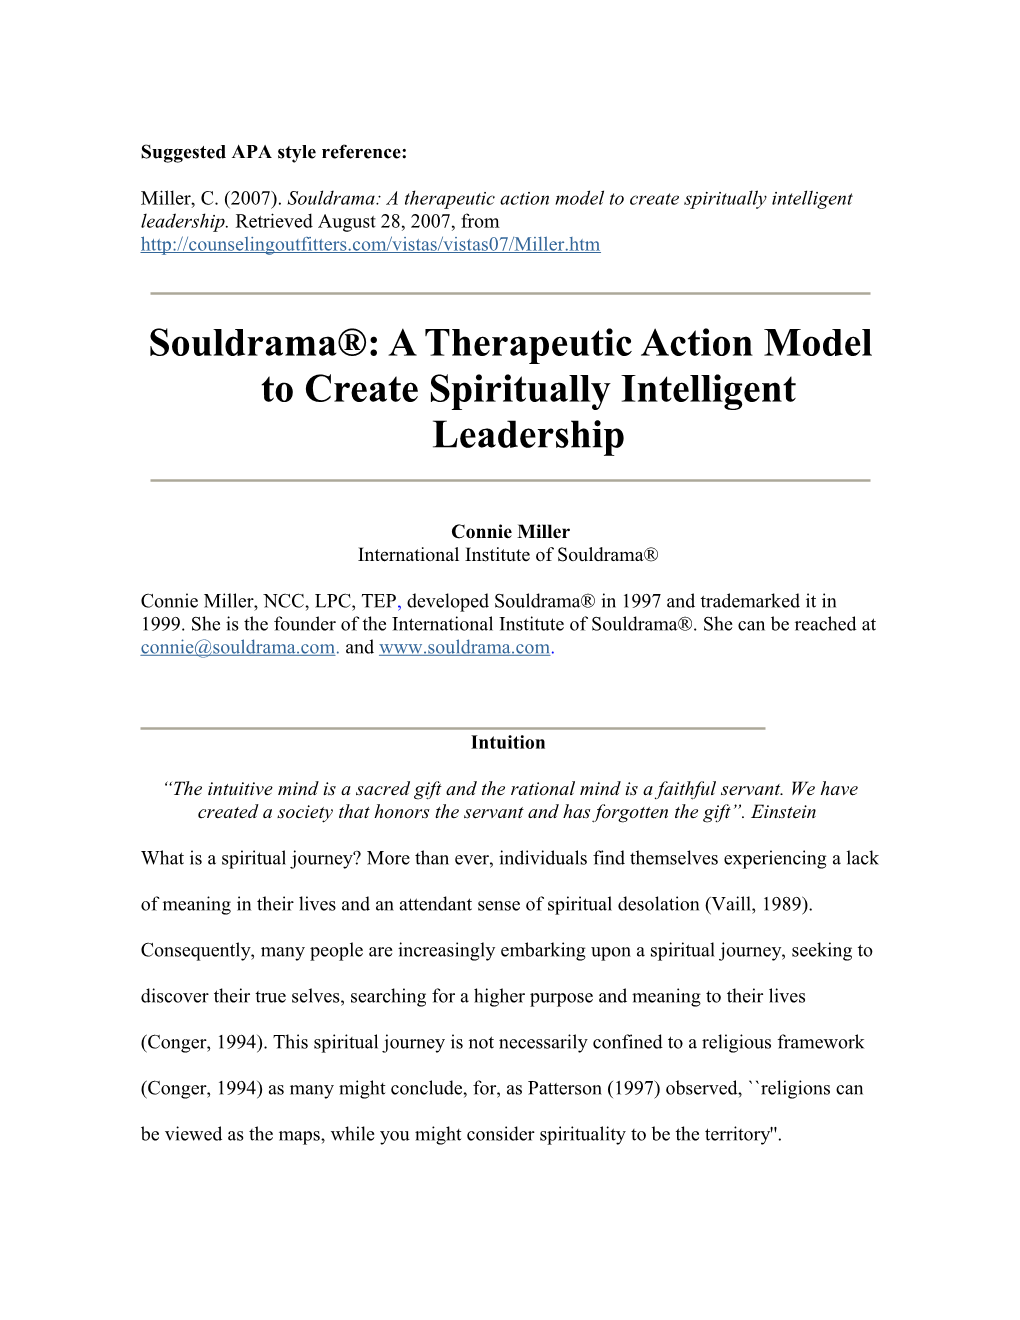 Souldrama: a Therapeutic Action Model to Create Spiritually Intelligent Leadership